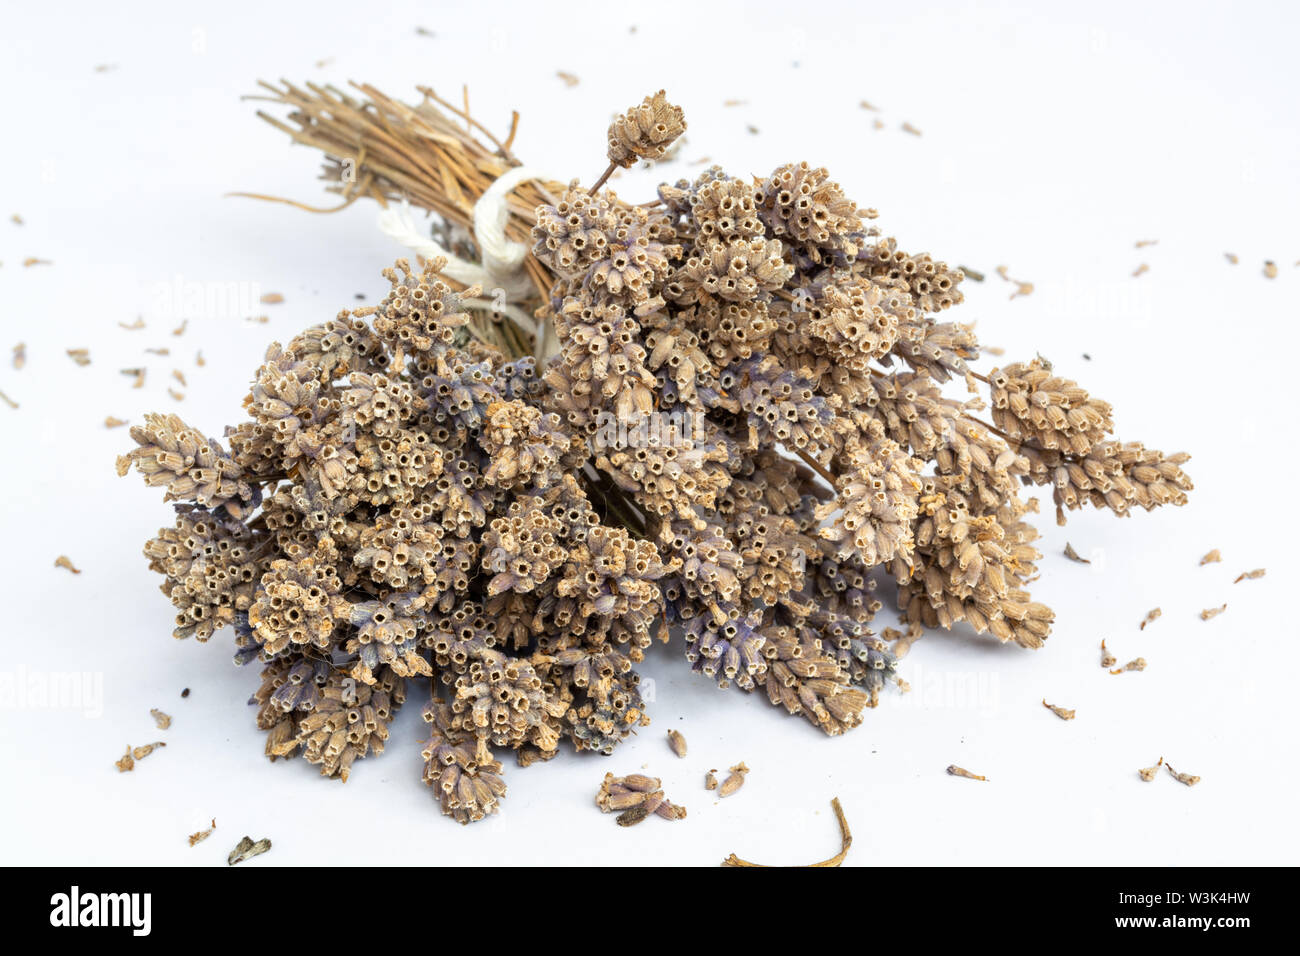 Bunches of very dry Lavender flowers in natural colour 1 Stock Photo